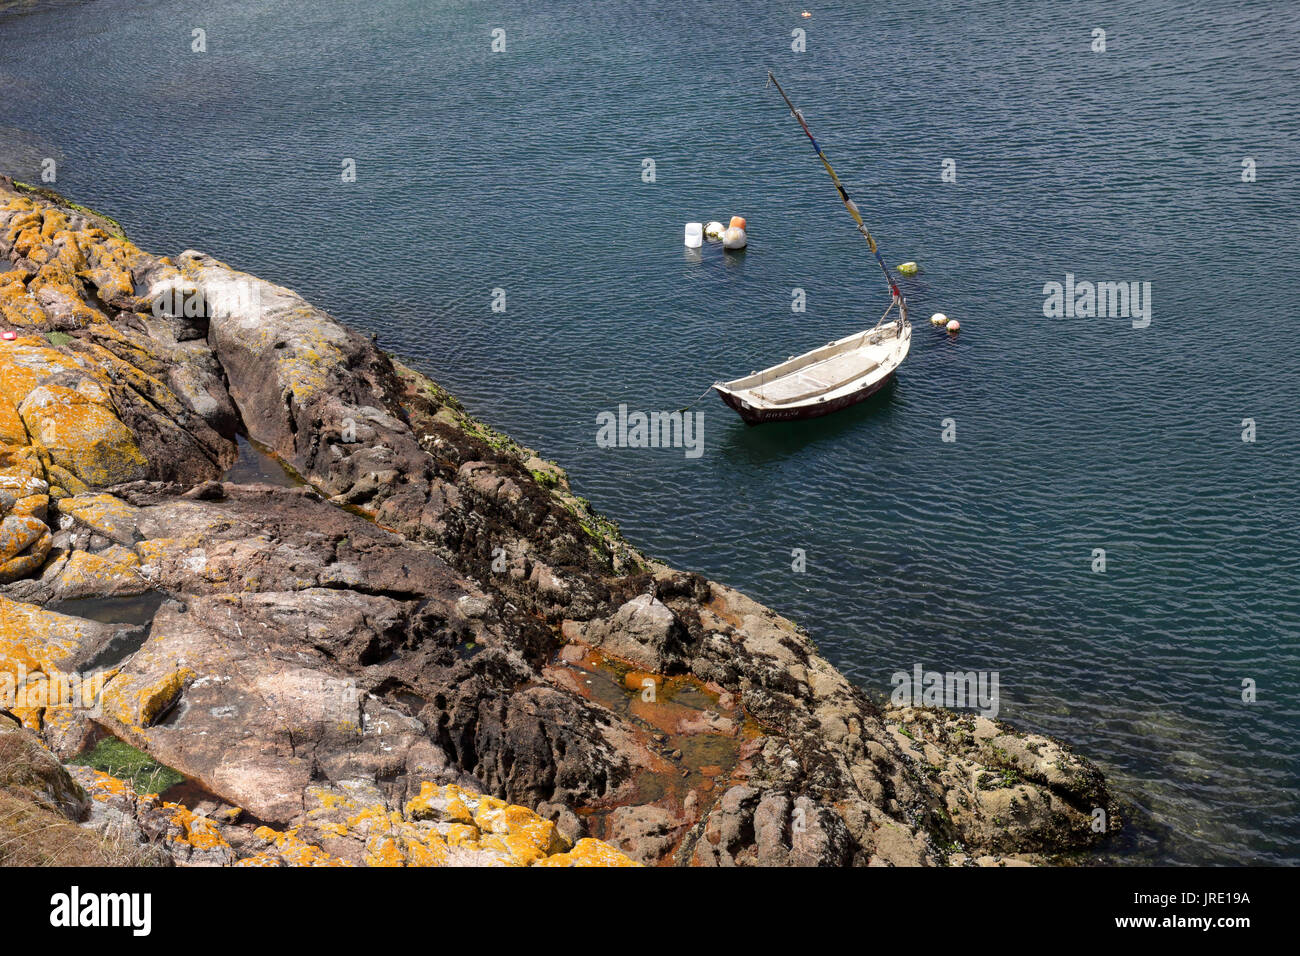 A small white wooden boat anchored in a port next to a rock pier and cliffs with some buoys. Stock Photo